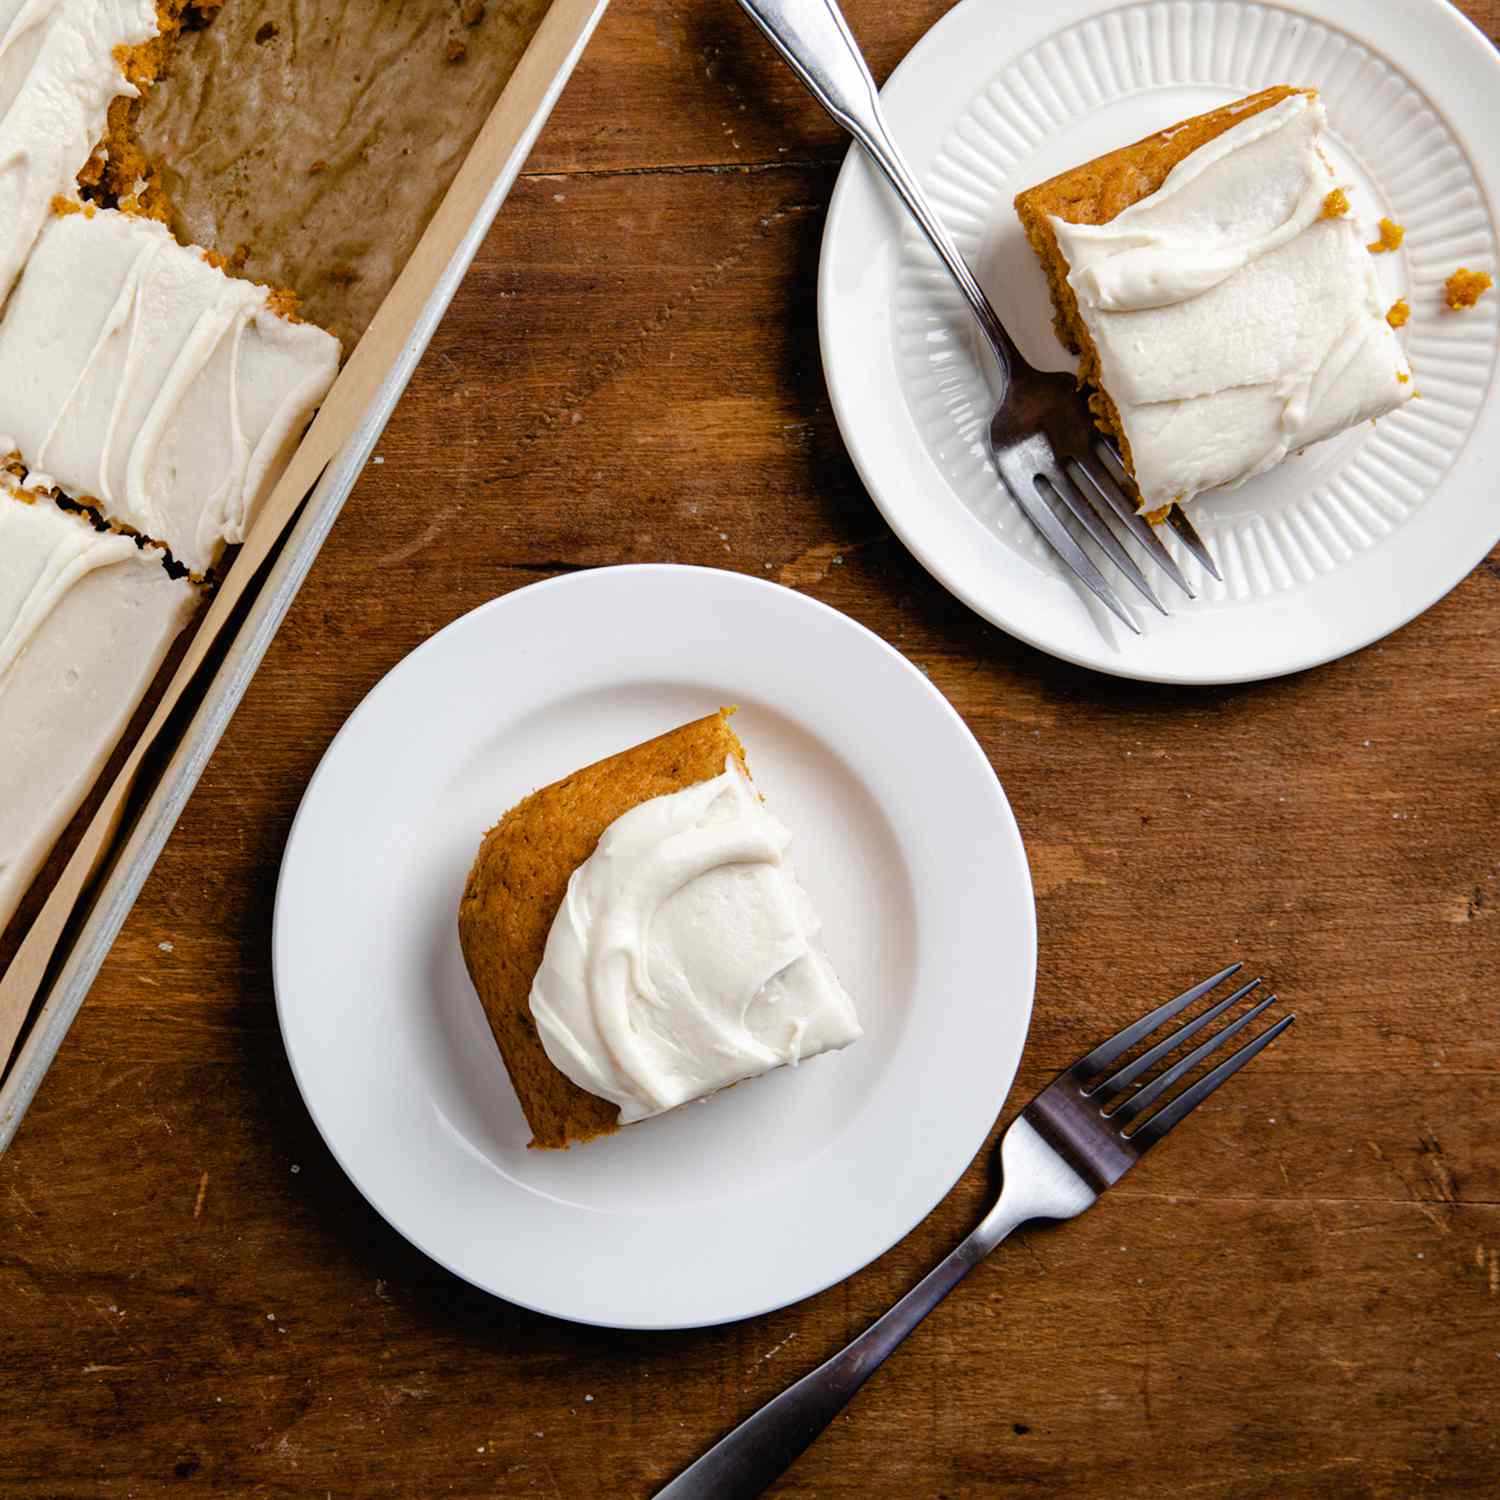 a recipe photo of the Pumpkin Sheet Cake with Cream Cheese Frosting in the cake pan with two slices cut and placed on plates alongside forks